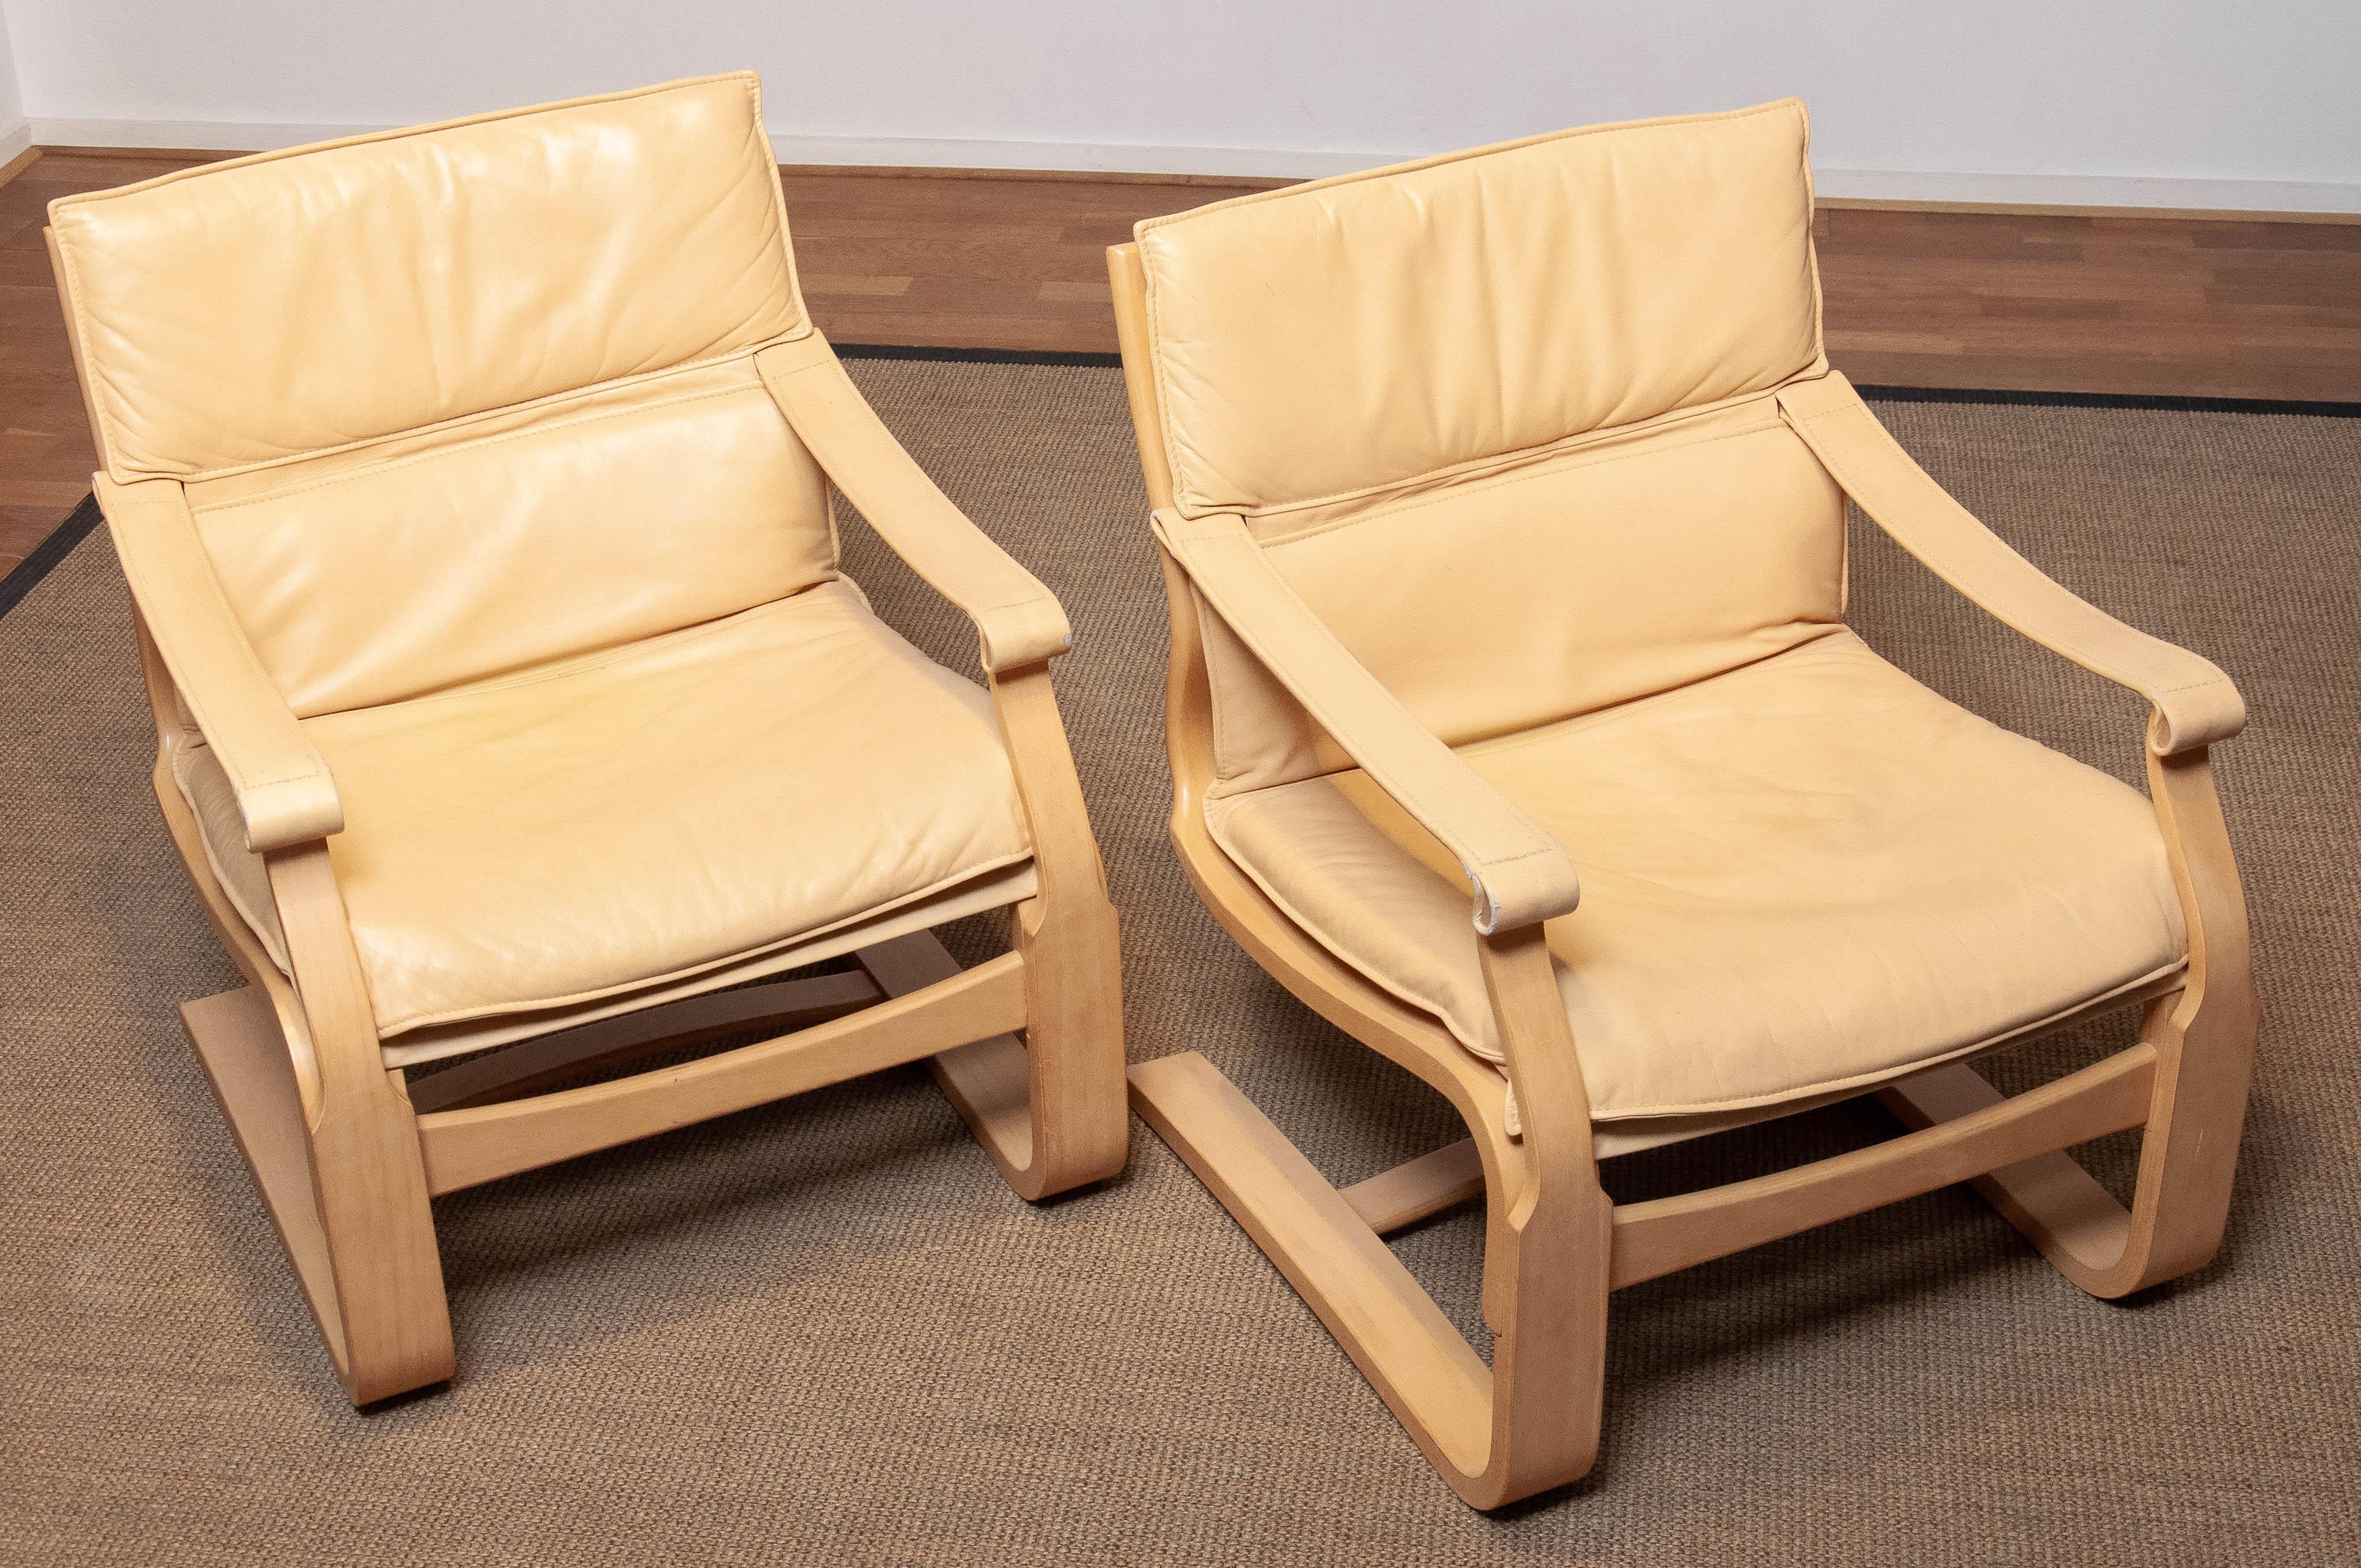 Pair Bentwood with Beige / Creme Leather Lounge Chairs by Ake Fribytter for Nelo For Sale 4